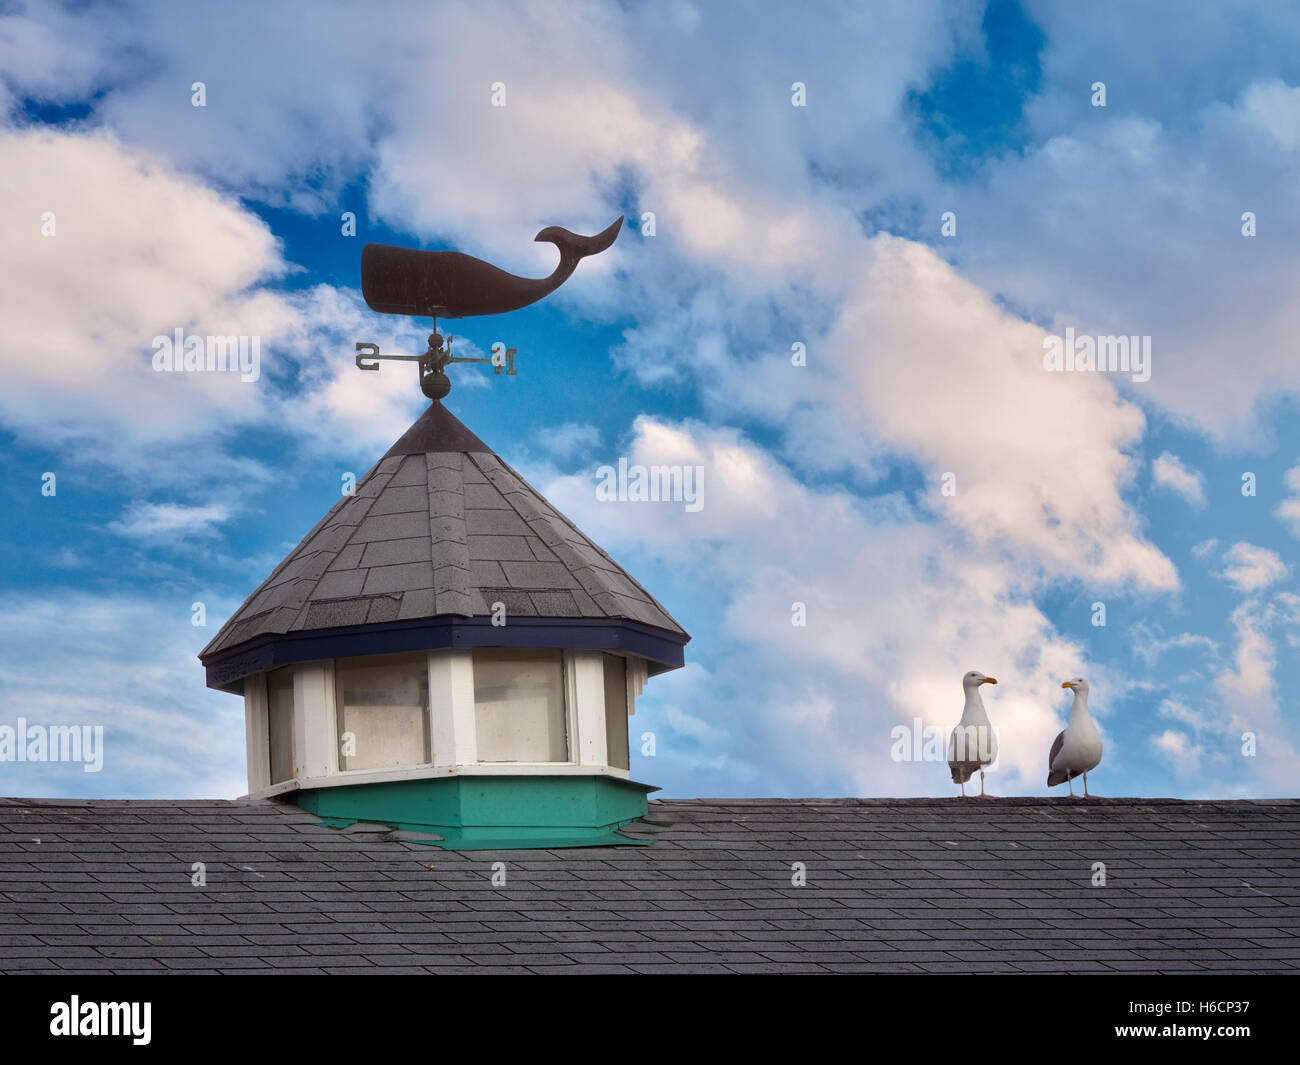 Seagulls on roof top with whale weather vain. Fisherman's Wharf. Monterey, California Stock Photo